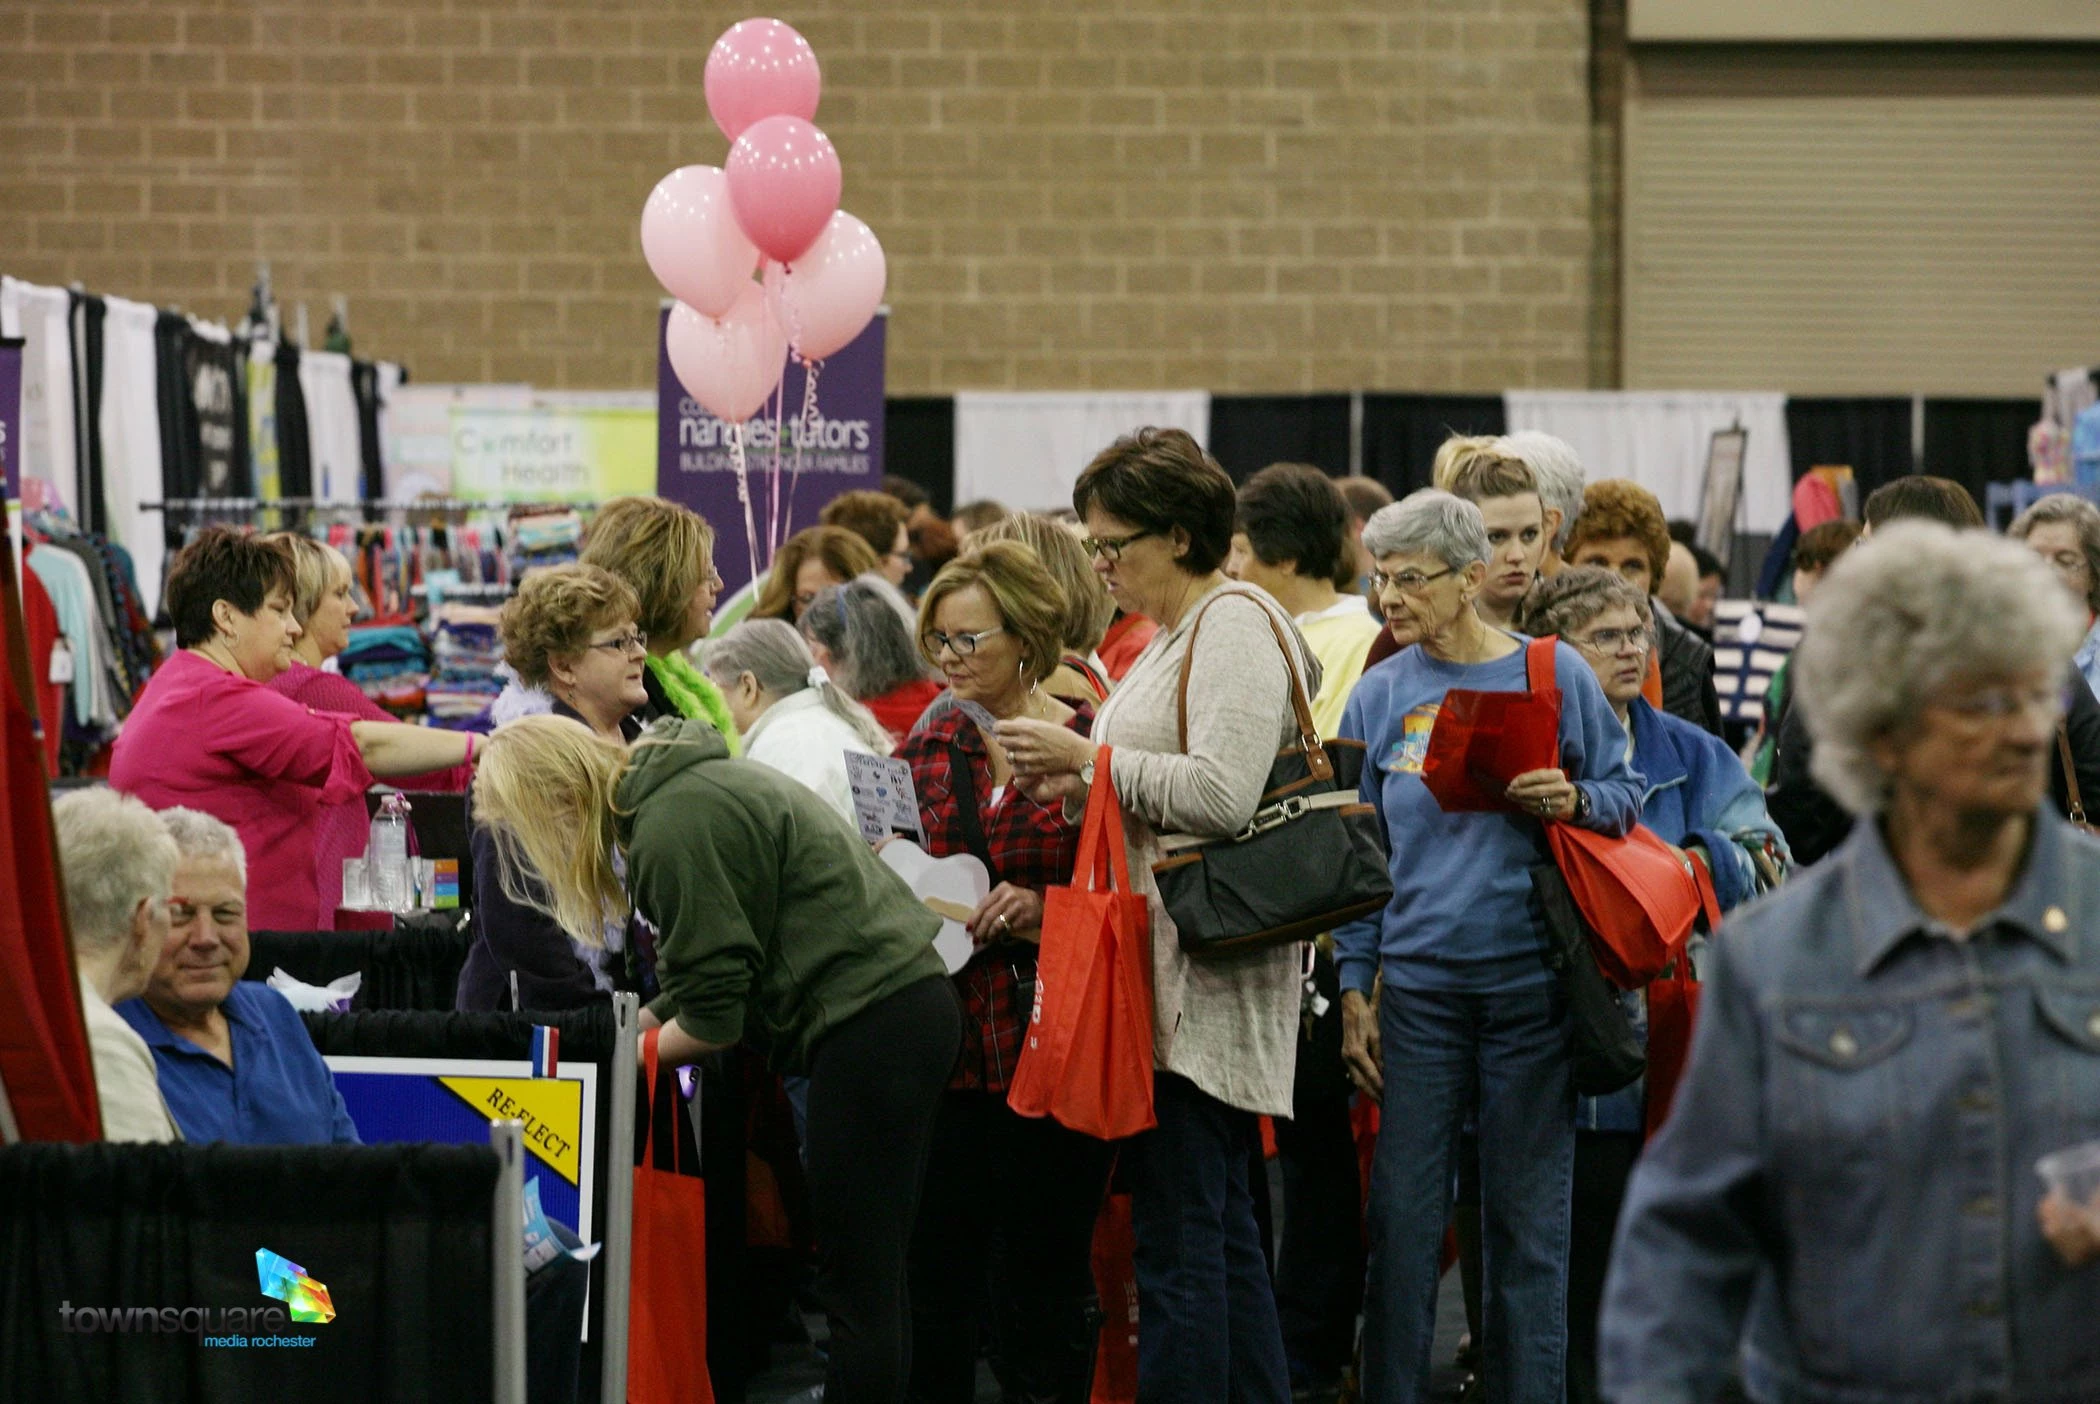 5 Reasons to Attend the Rochester Women’s Fall Expo